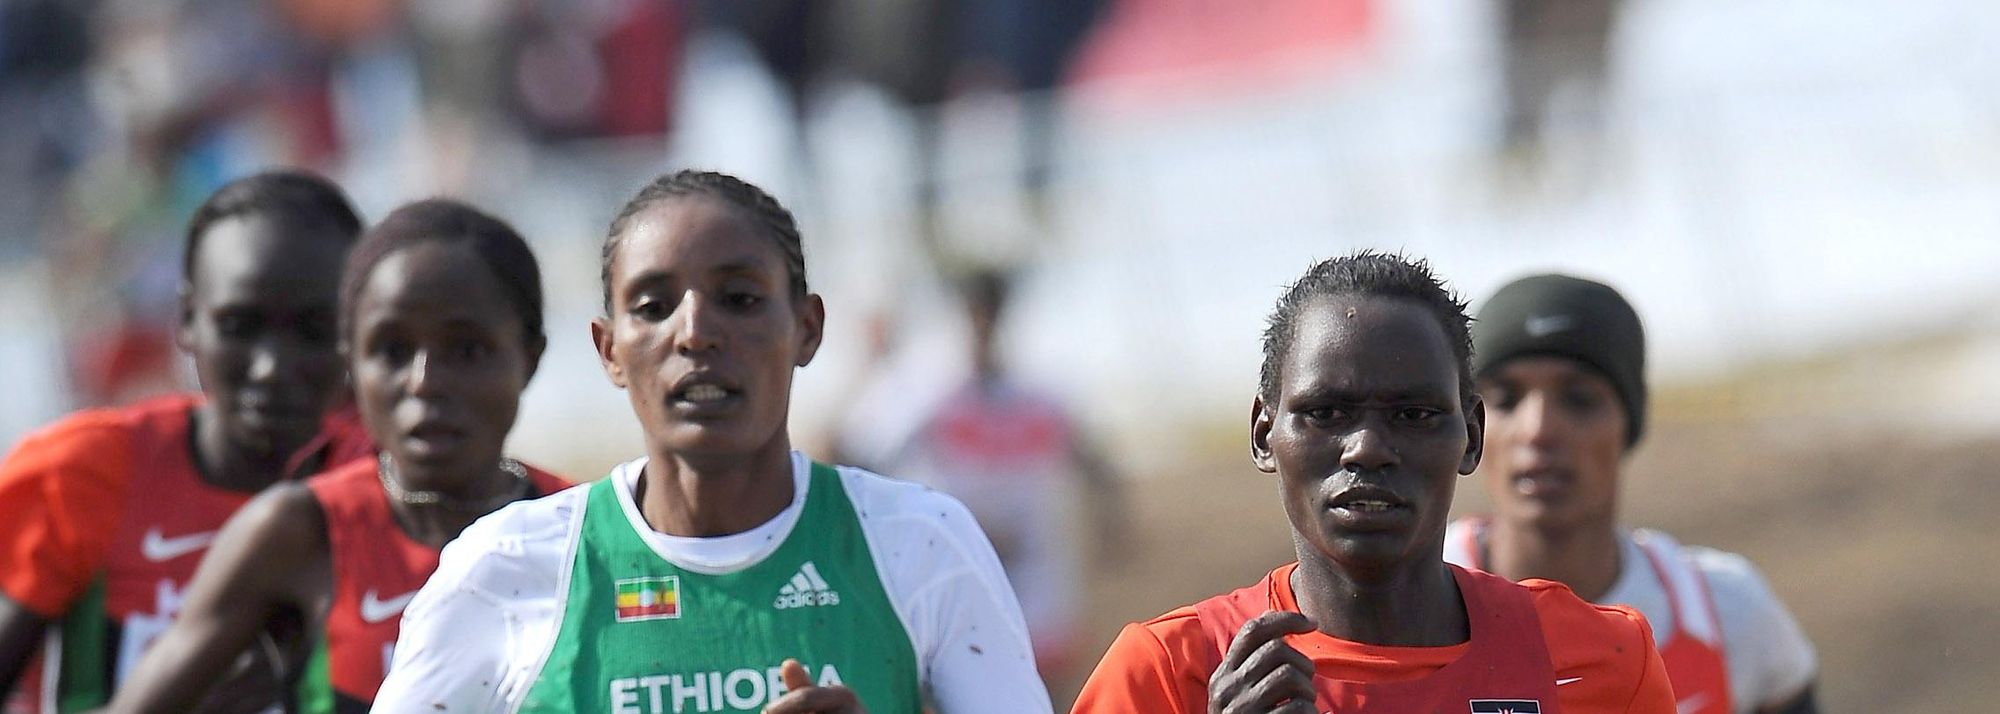 After making an impressive return to the top of the podium at the IAAF World Cross Country Championships in the Polish city Bydgoszcz on Sunday (24), Emily Chebet has set her sights on transferring her sparkling form to the track at the IAAF World Championships in Moscow this summer. 